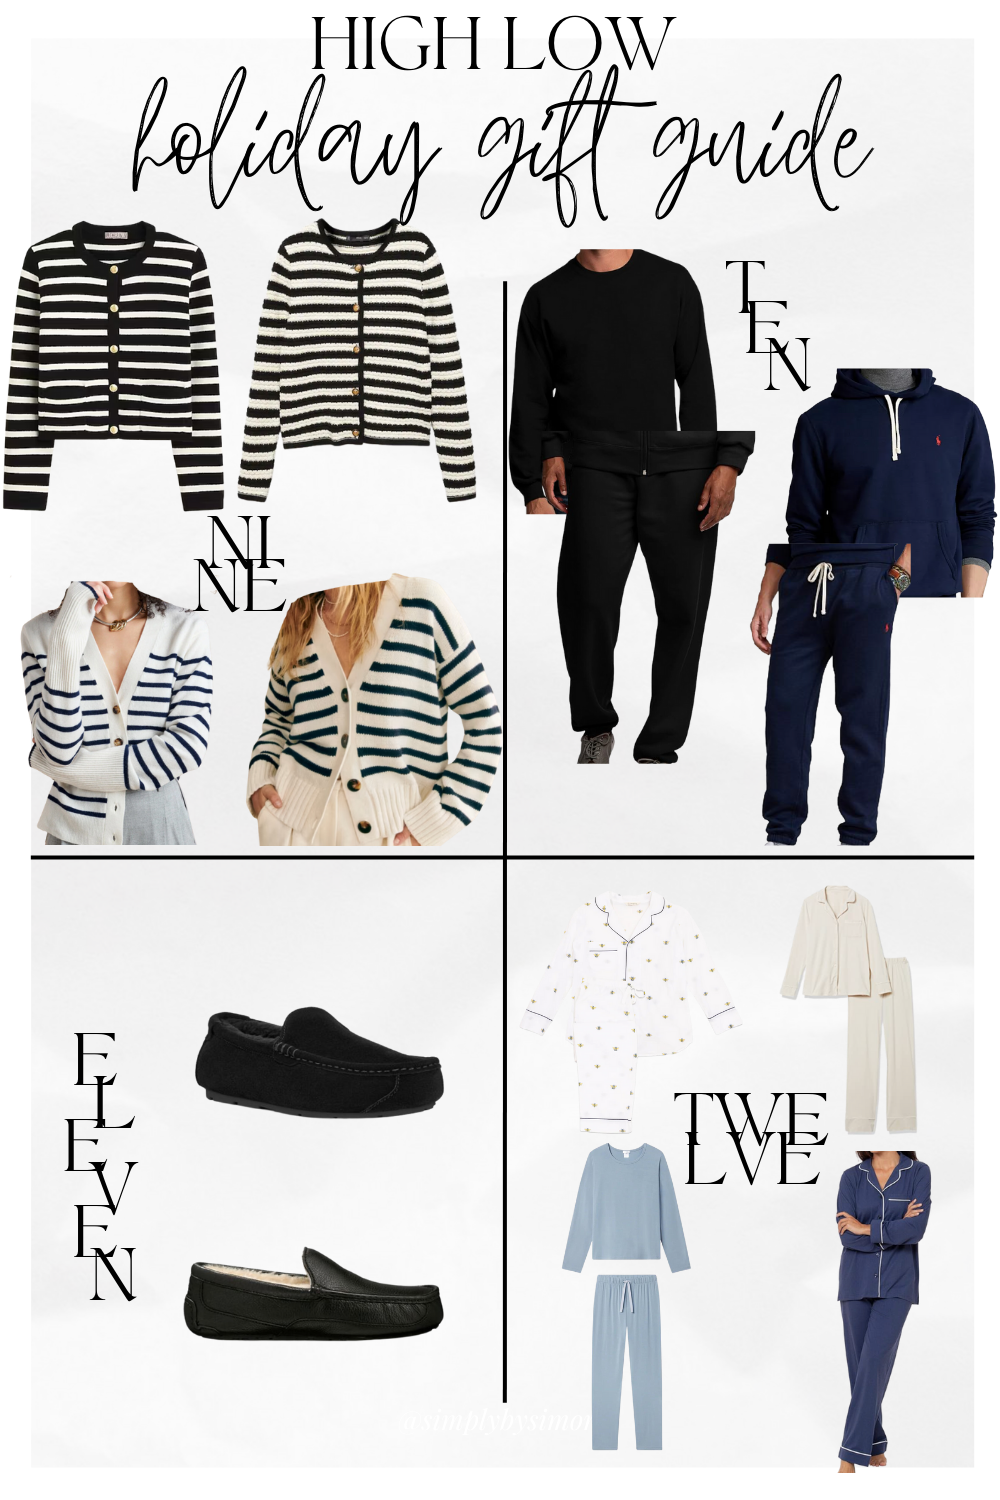 High Low Holiday Gift Guide Collage consisting of Striped Cardigans J.Crew patch-pocket sweater, Mango Striped cardigan with jewel buttons, | La Ligne Lean Lines Cardigan, Sezane natural and navy stripe cardigan, Ralph Lauren Full-Zip Fleece Hoodie and Drawstring Pants, Fruit of the Loom Eversoft Crewneck and Drawstring Pants, UGG Men's black leather Ascot Leather Slipper, Koolaburra by UGG suede, wool and faux fur interior slippers and Eberjey Gisele pajamas, LAKE Dream Knit pajamas, Printfresh Beekeeper print pajamas and Amazon Jersey Set pajamas 